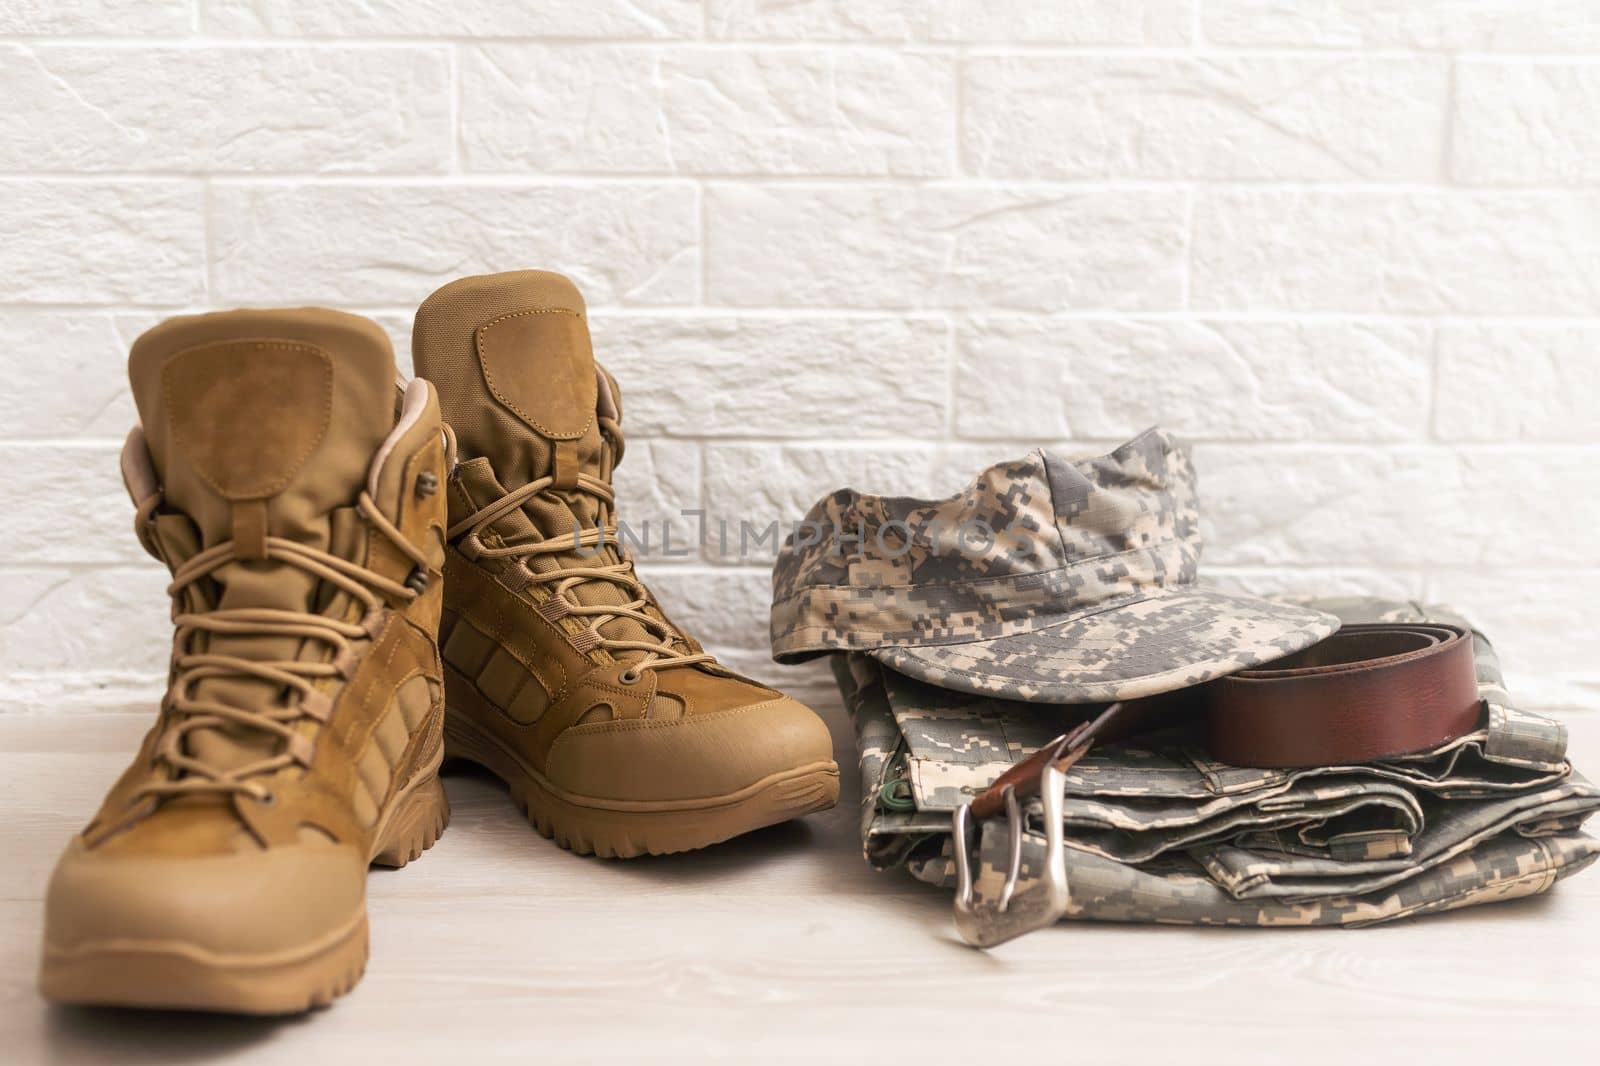 Set of military uniform on wooden background, close up view.